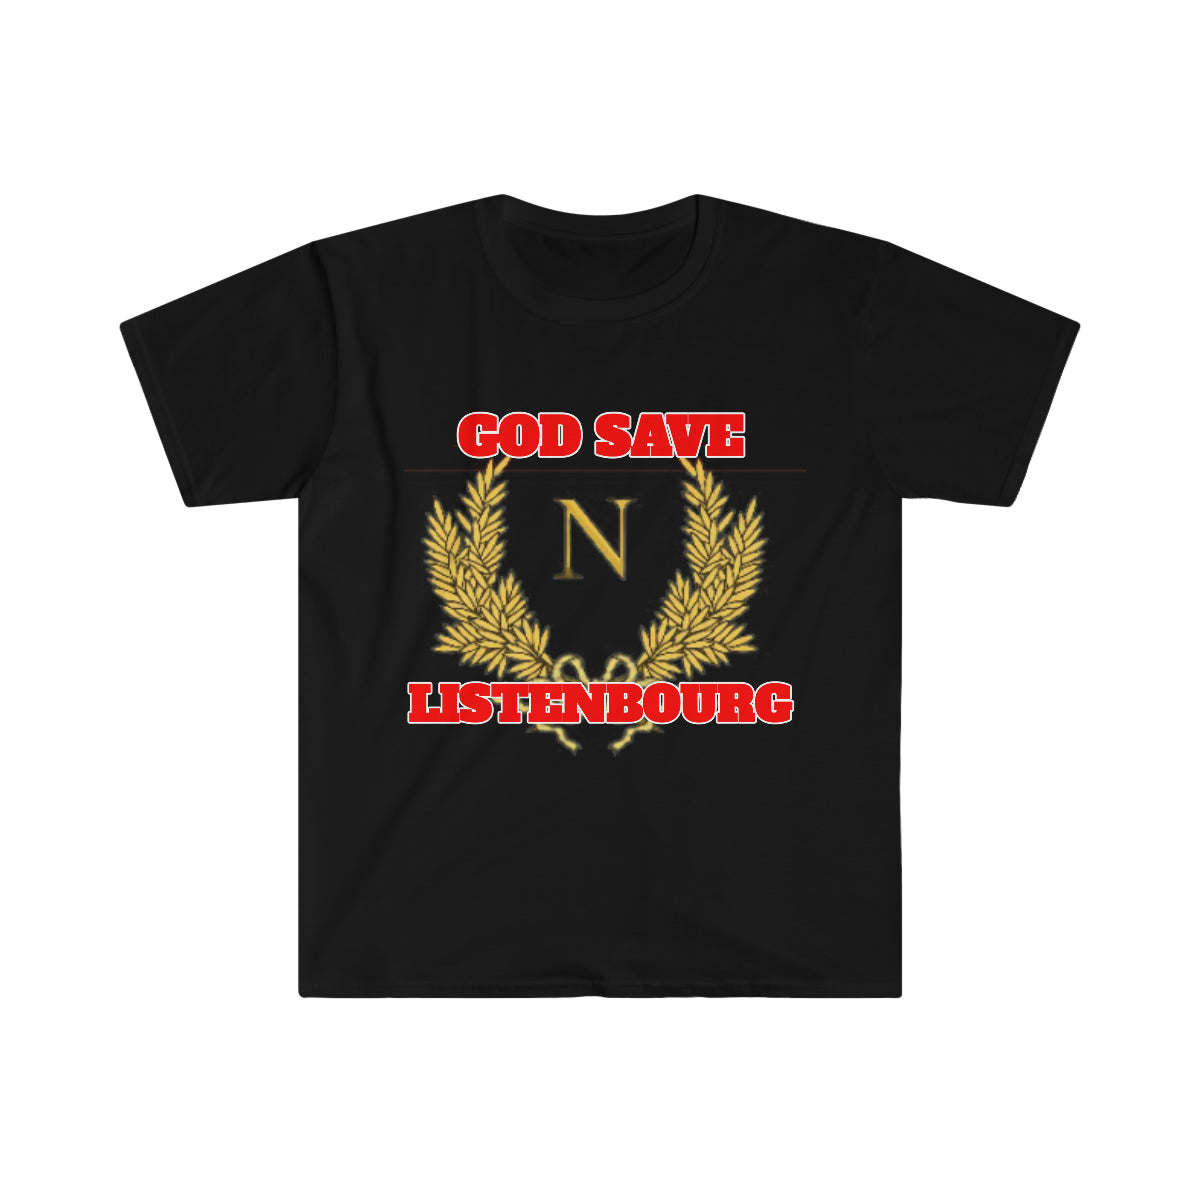 Sentence with product name: Elevate your wardrobe with this premium God Save Listebourg T-Shirt featuring striking red and yellow text. A true wardrobe essential.